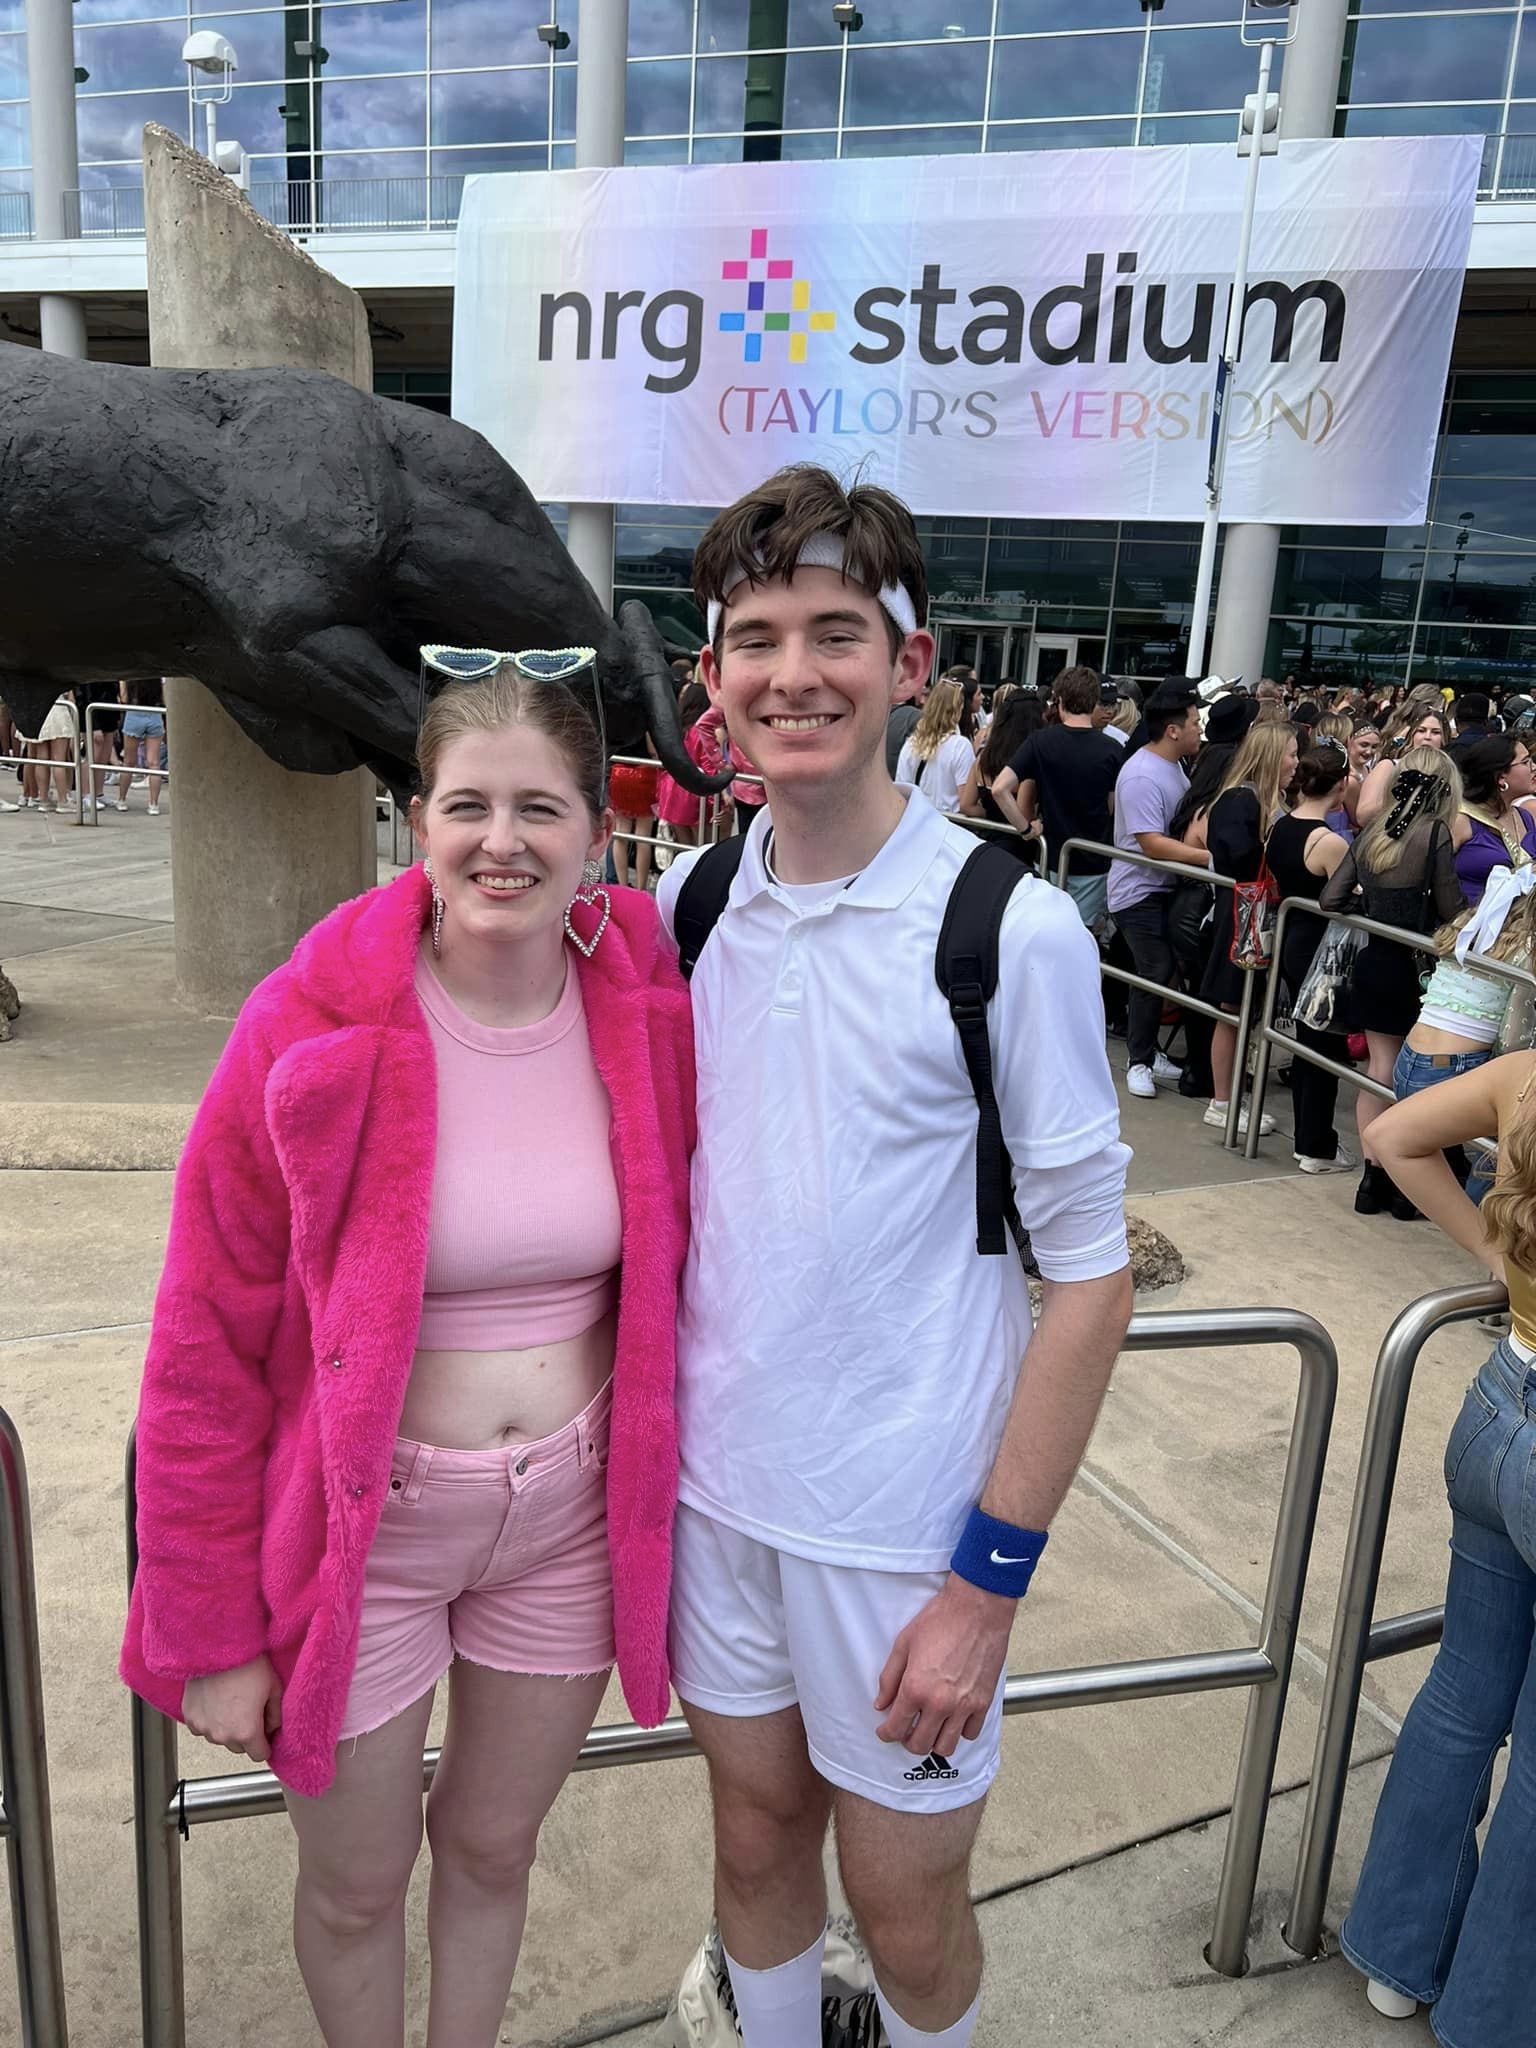 Jacob Lewis and his sister April Bancroft hours before the Taylor Swift concert in Texas.  Photo: Facebook/Steve Lewis